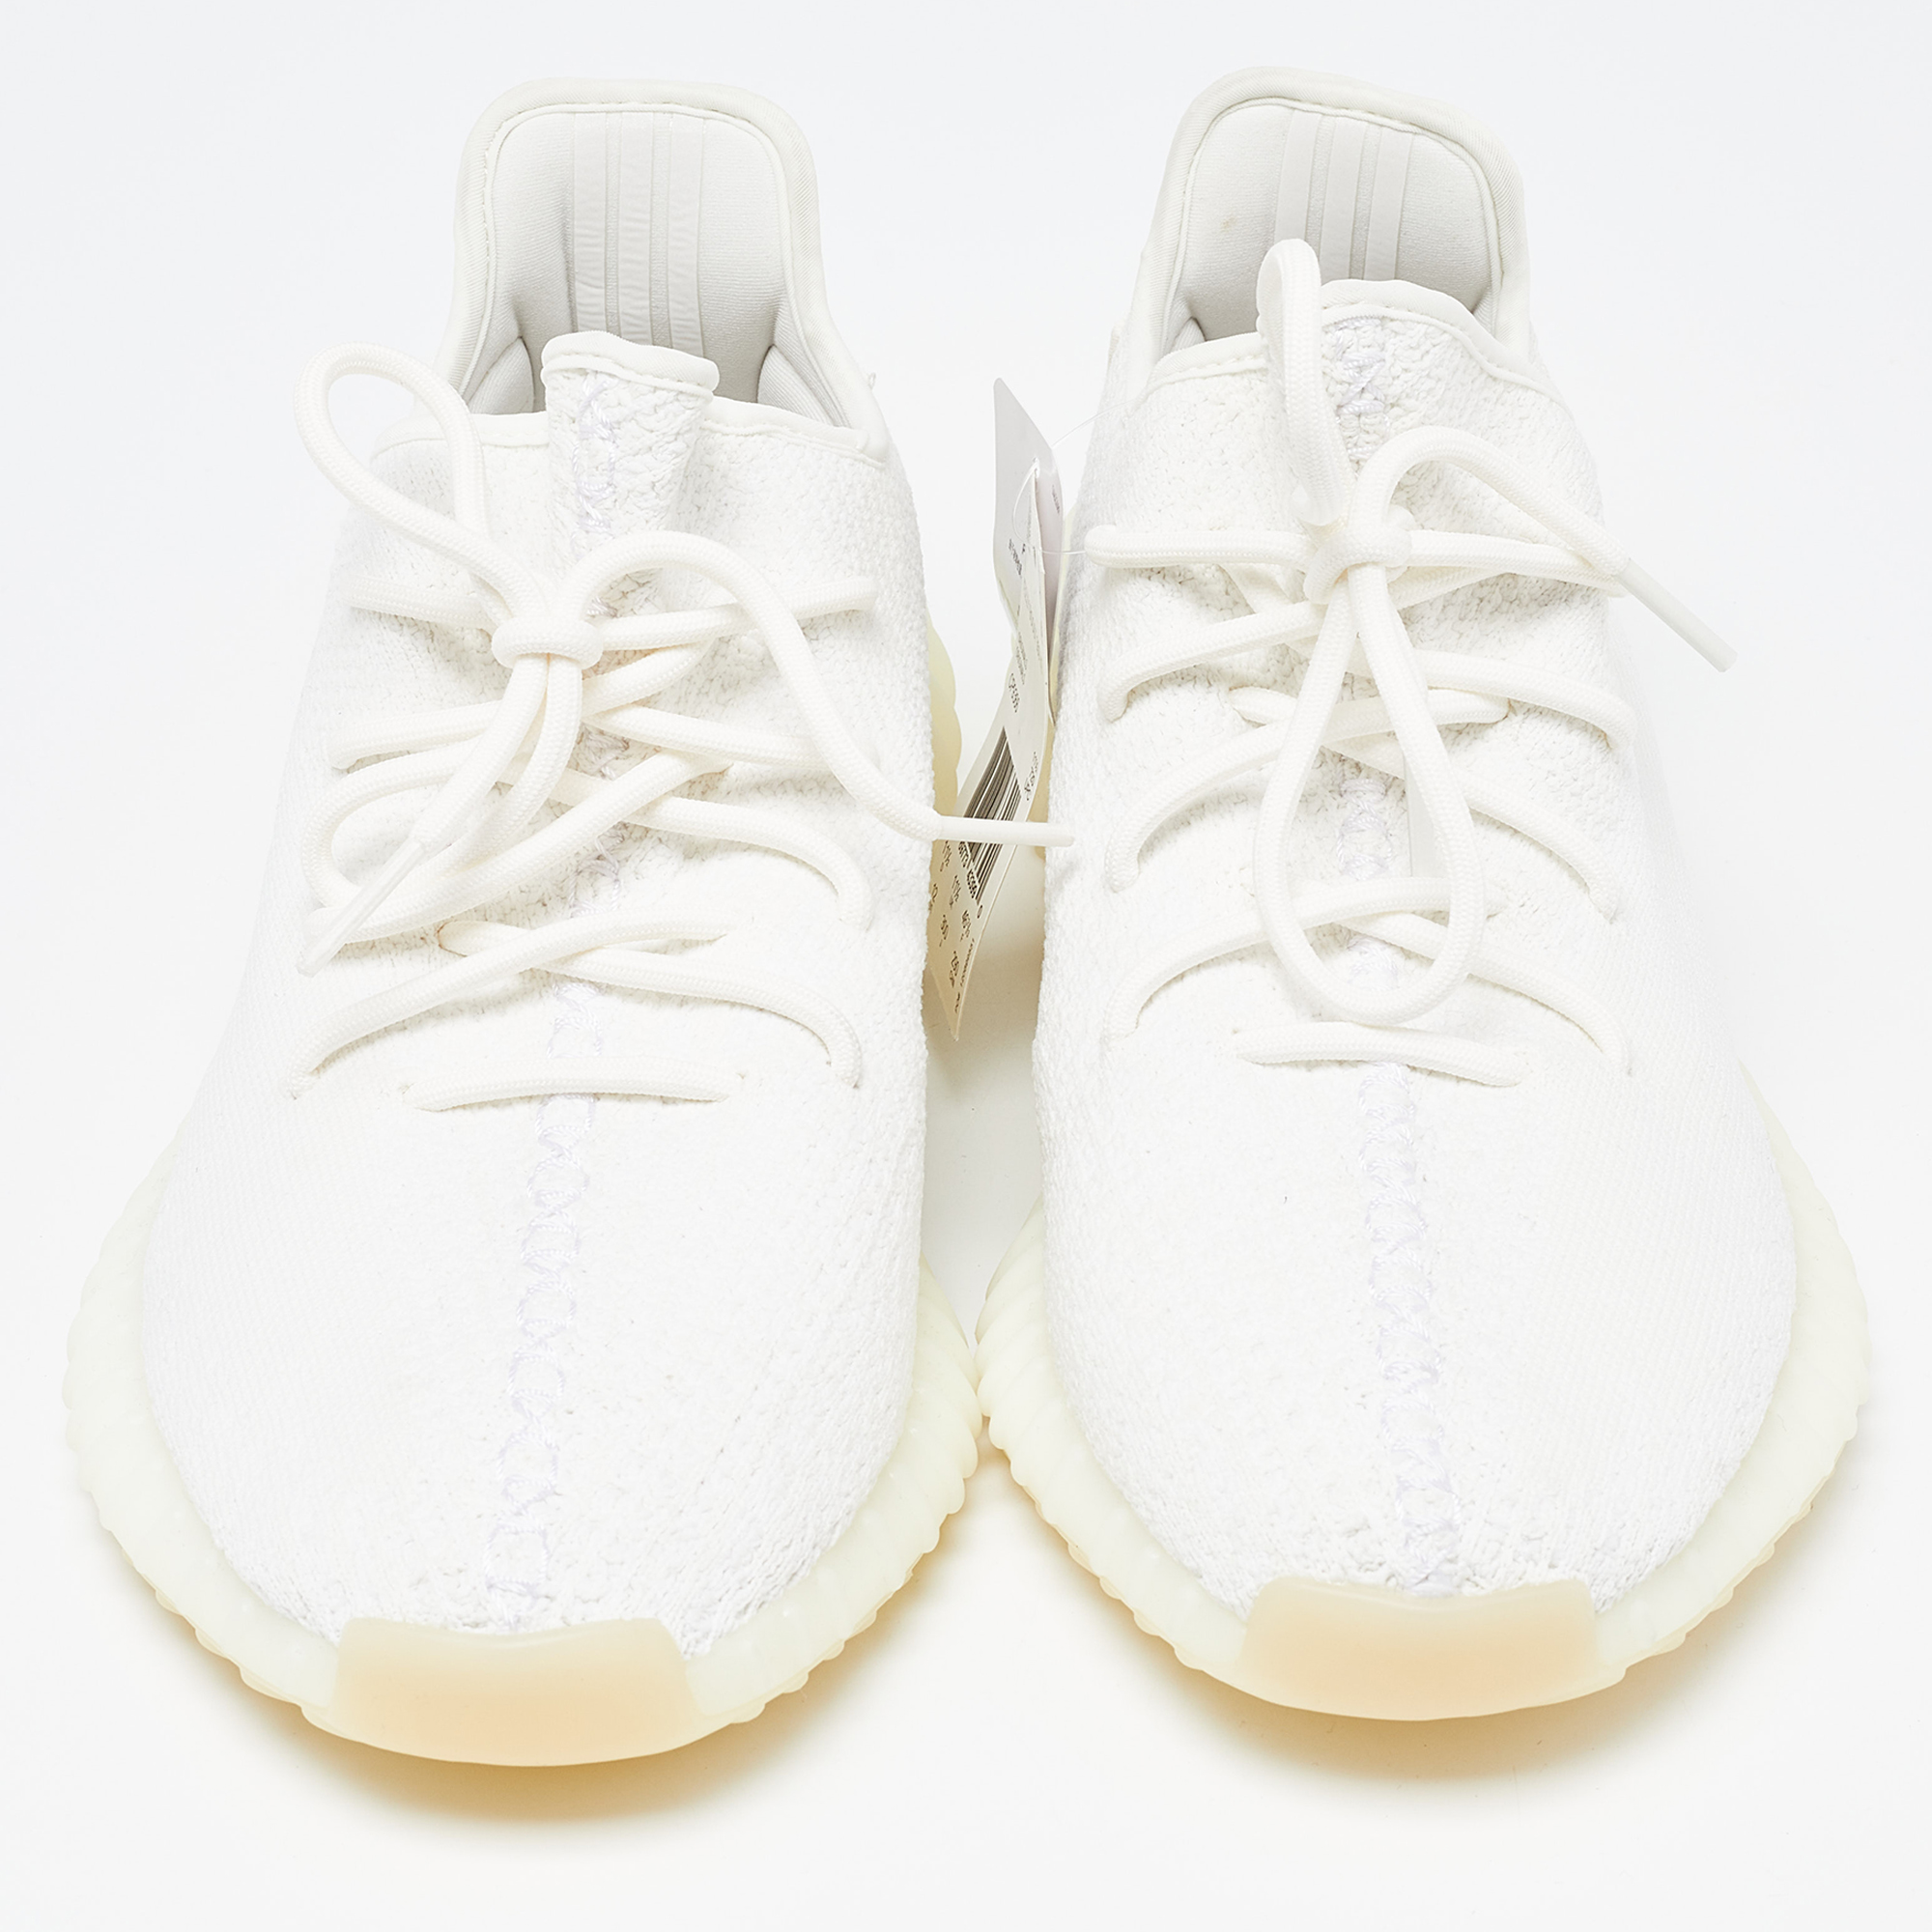 Yeezy X Adidas Off White Knit Fabric Boost 350 V2 Triple White Sneakers Size 46 2/3